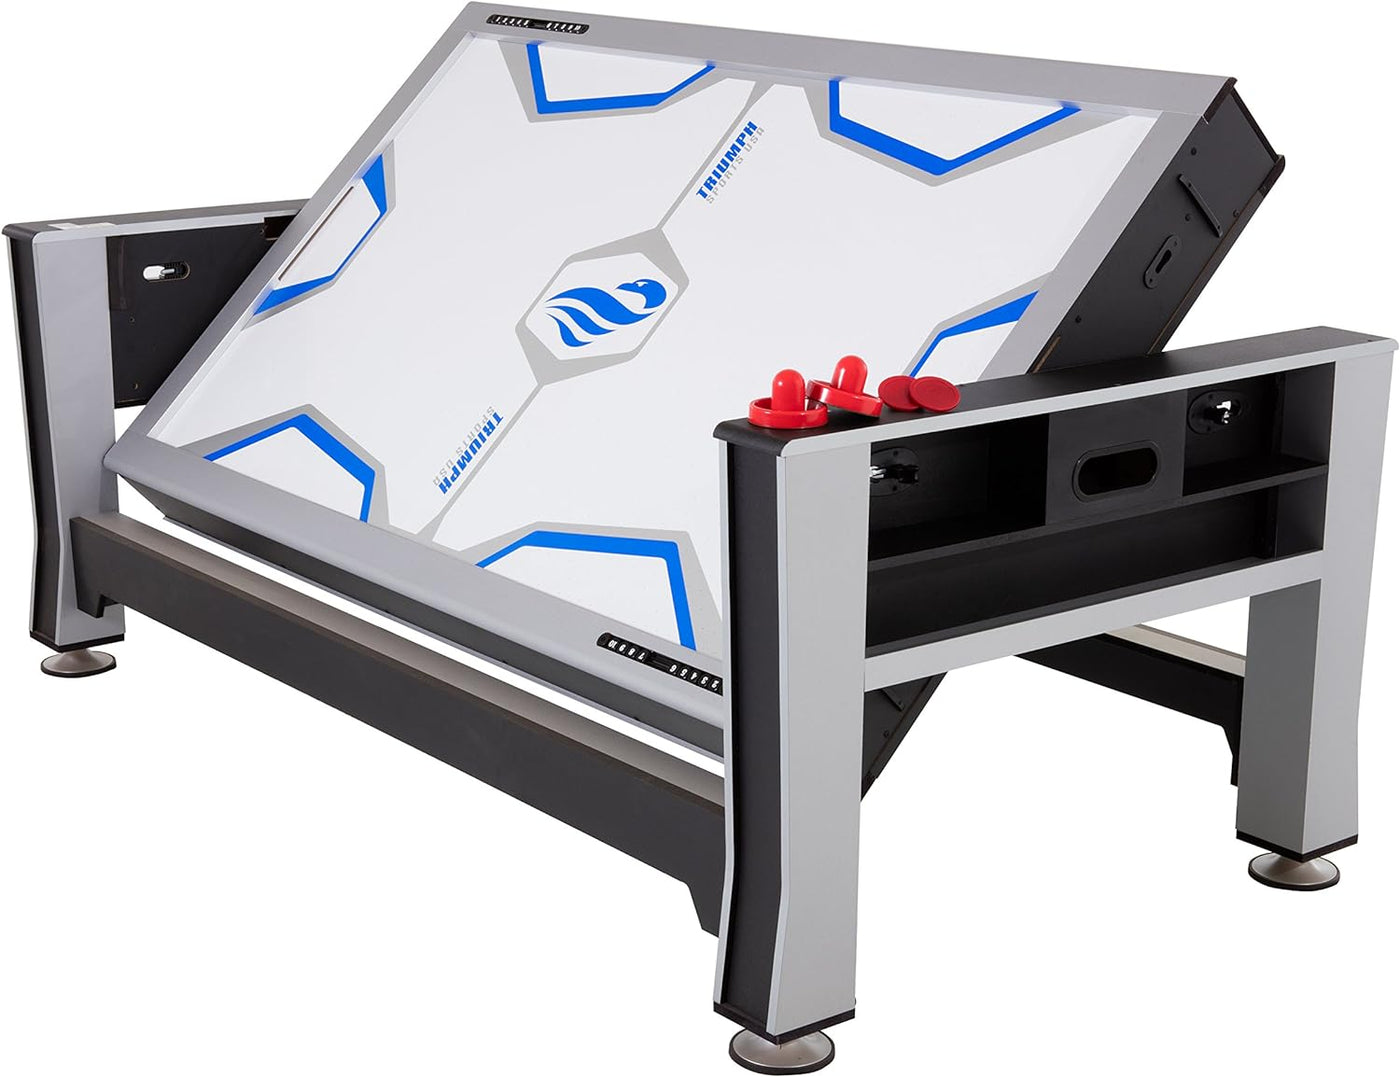 Triumph 3-in-1 7' Rotating Swivel Multigame Table - Air Hockey, Pool, & Table Tennis- $500